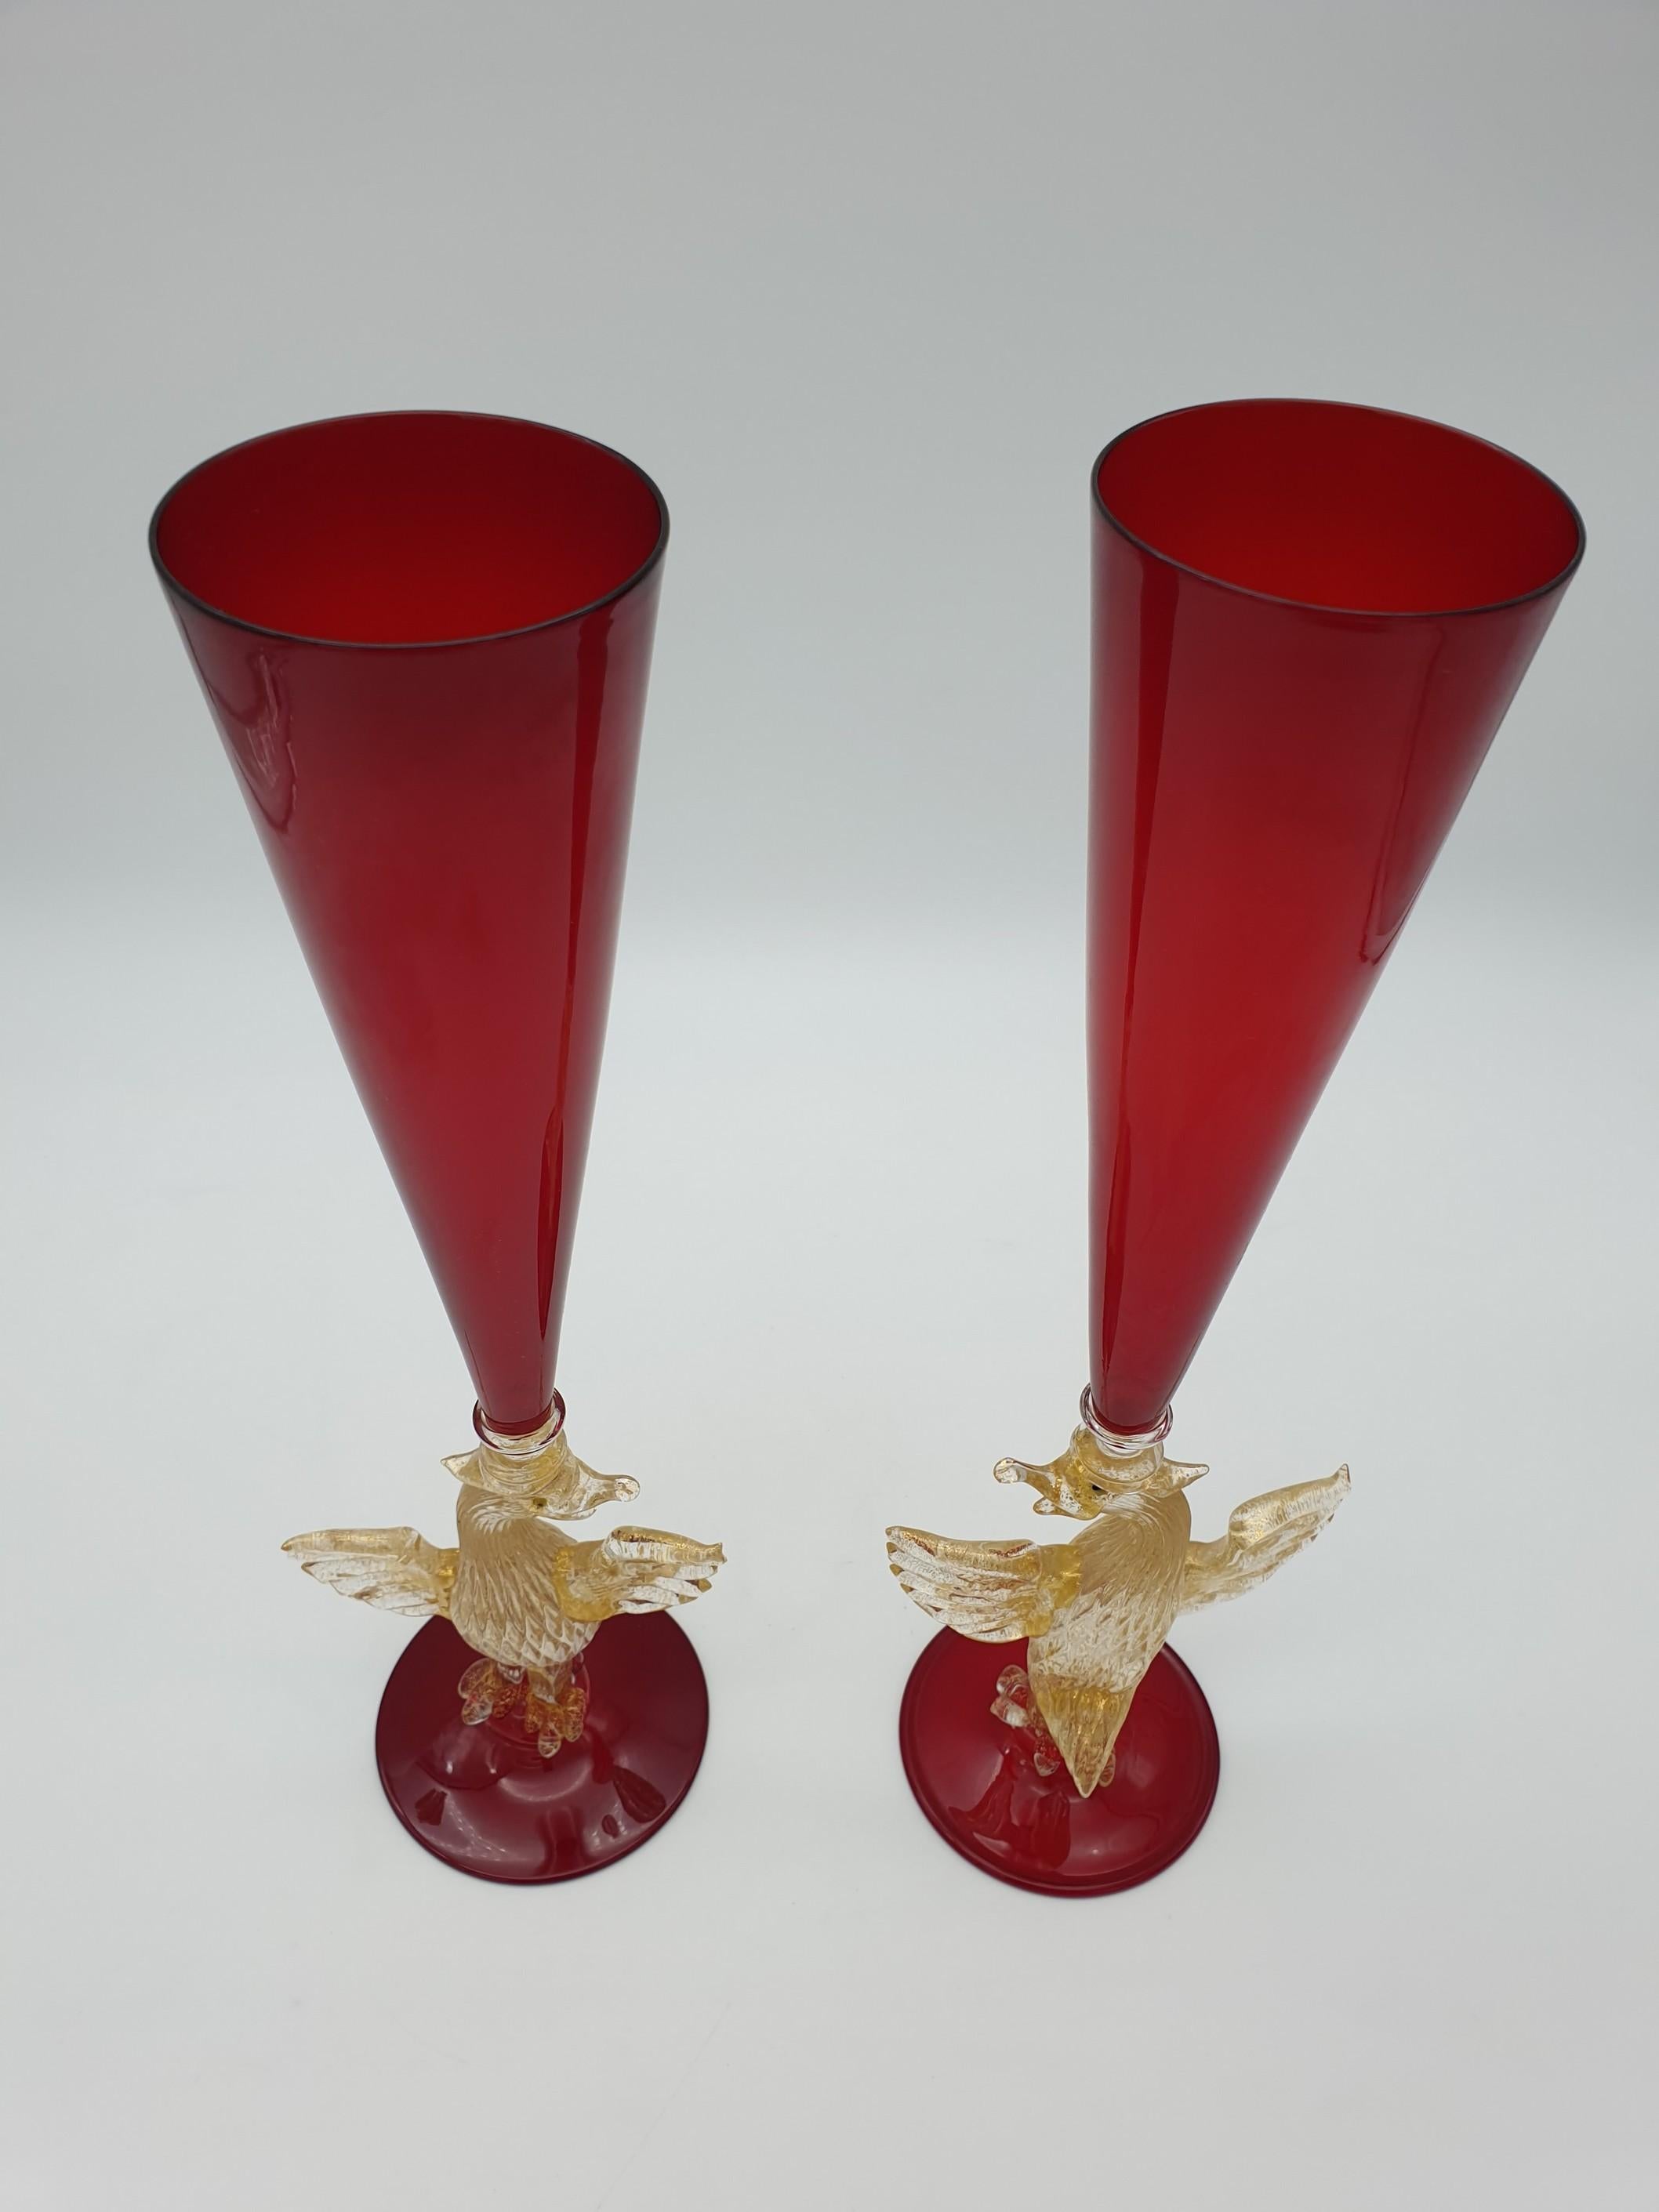 Pair of Modern Murano Glass Red Goblets with Gold Phoenix by Gino Cenedese 1990s For Sale 7